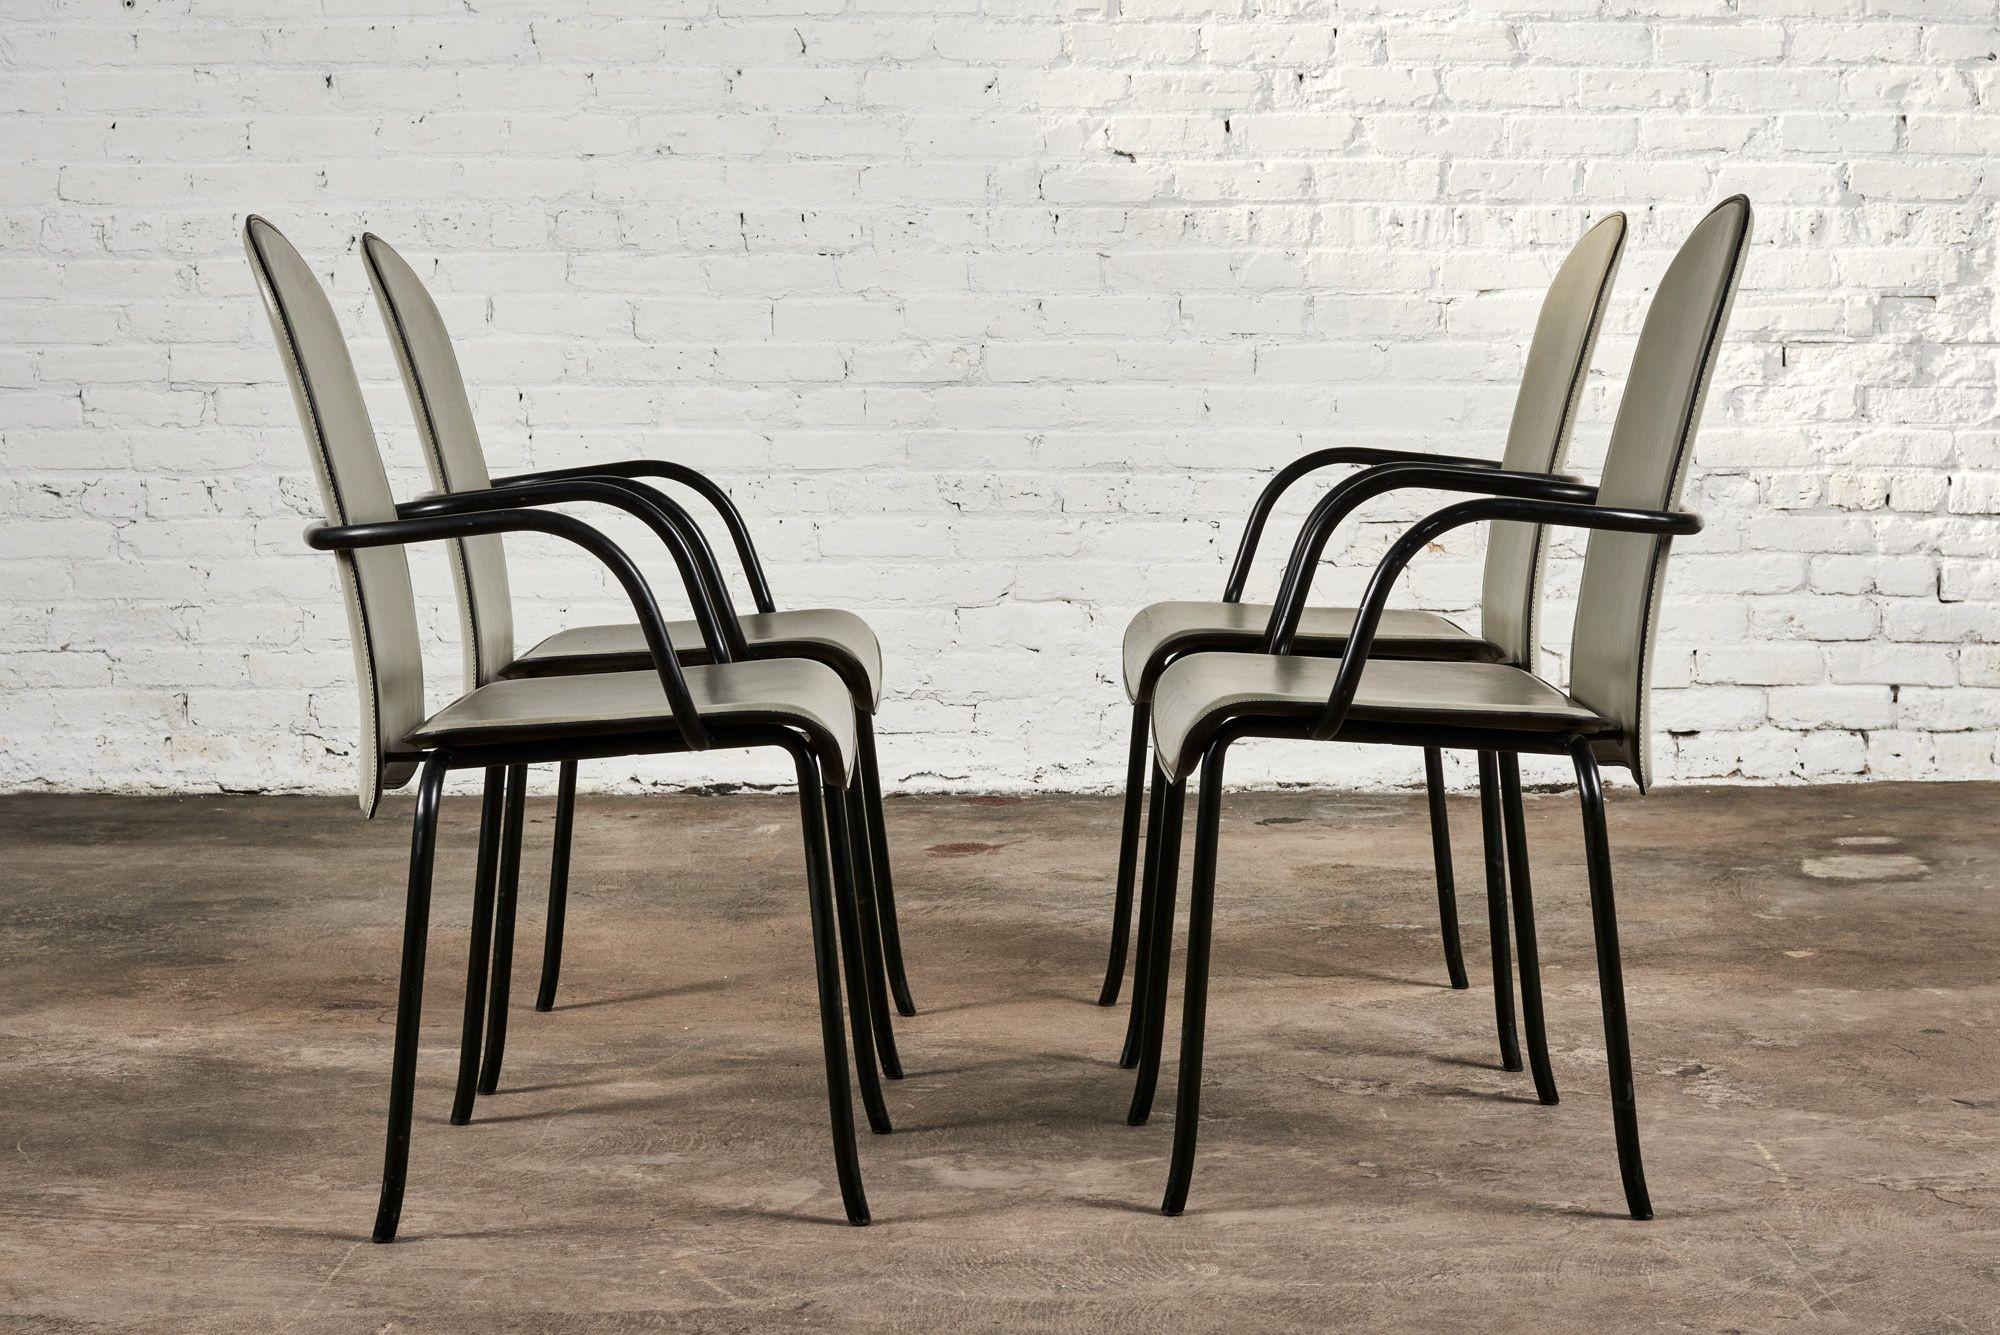 Cidue Italian grey leather and black enameled steel dining chairs, 1970. Designed by Giorgio Cattelan. Original leather and metal frames in excellent condition.